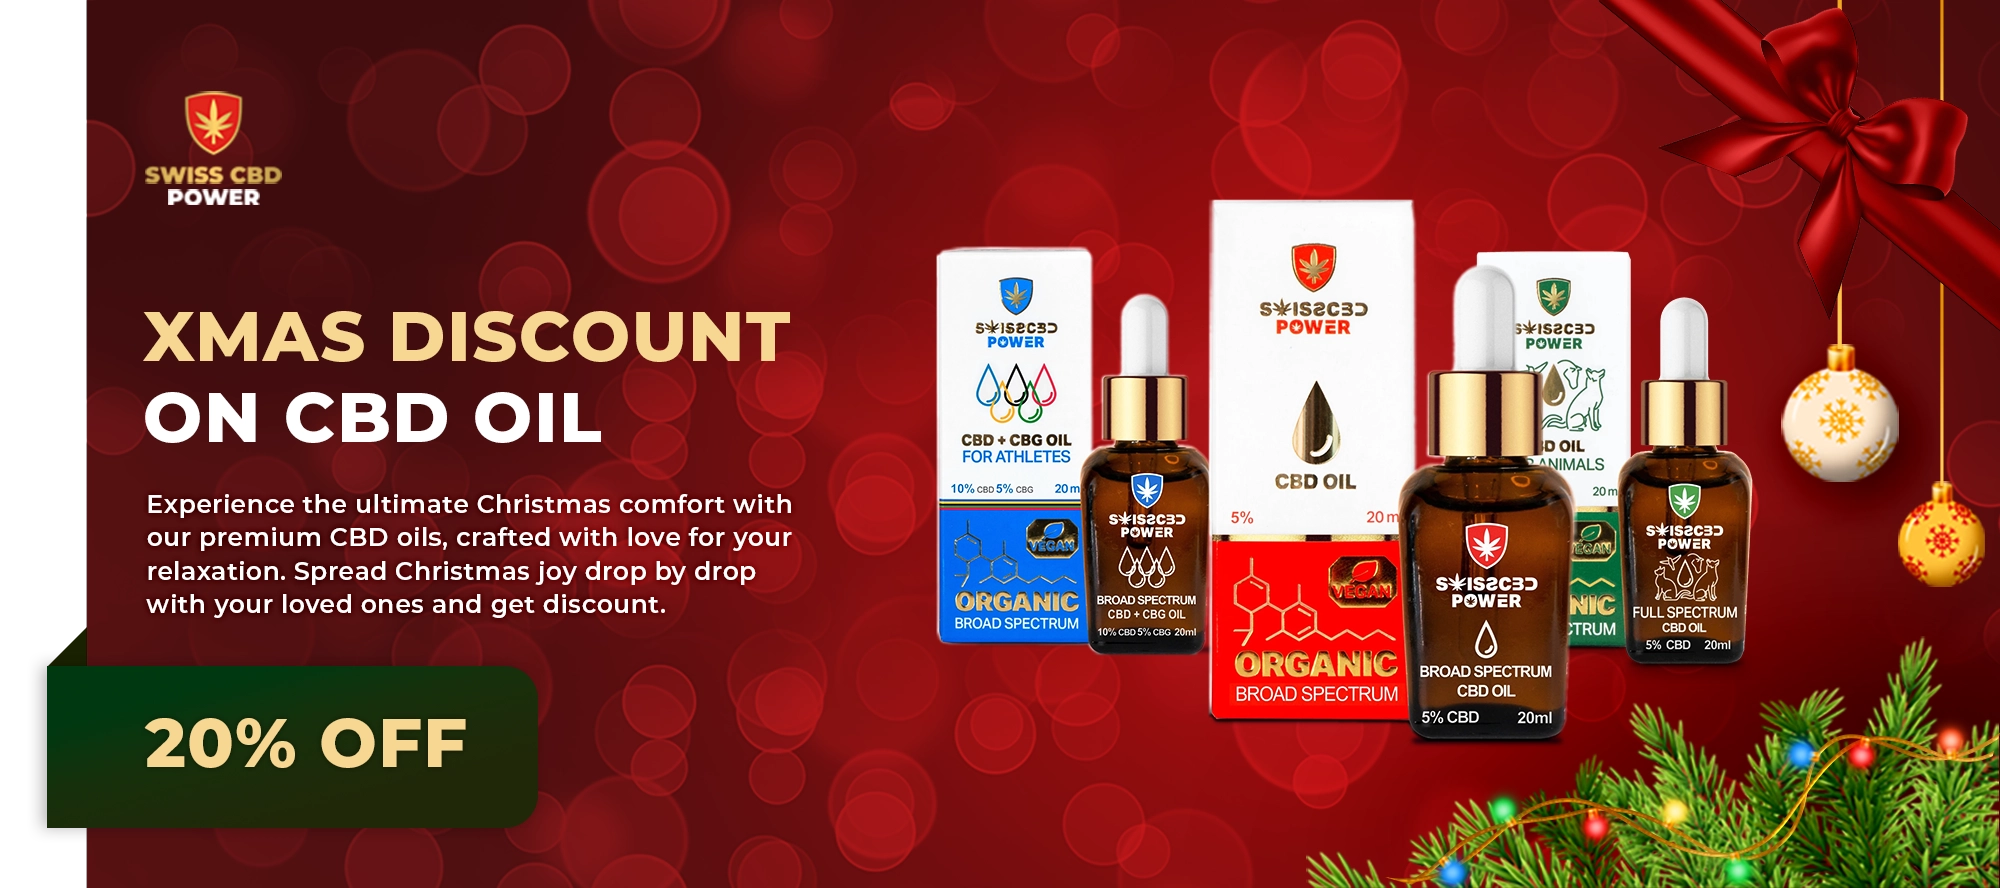 Delight yourself and your loved ones with our CBD oils